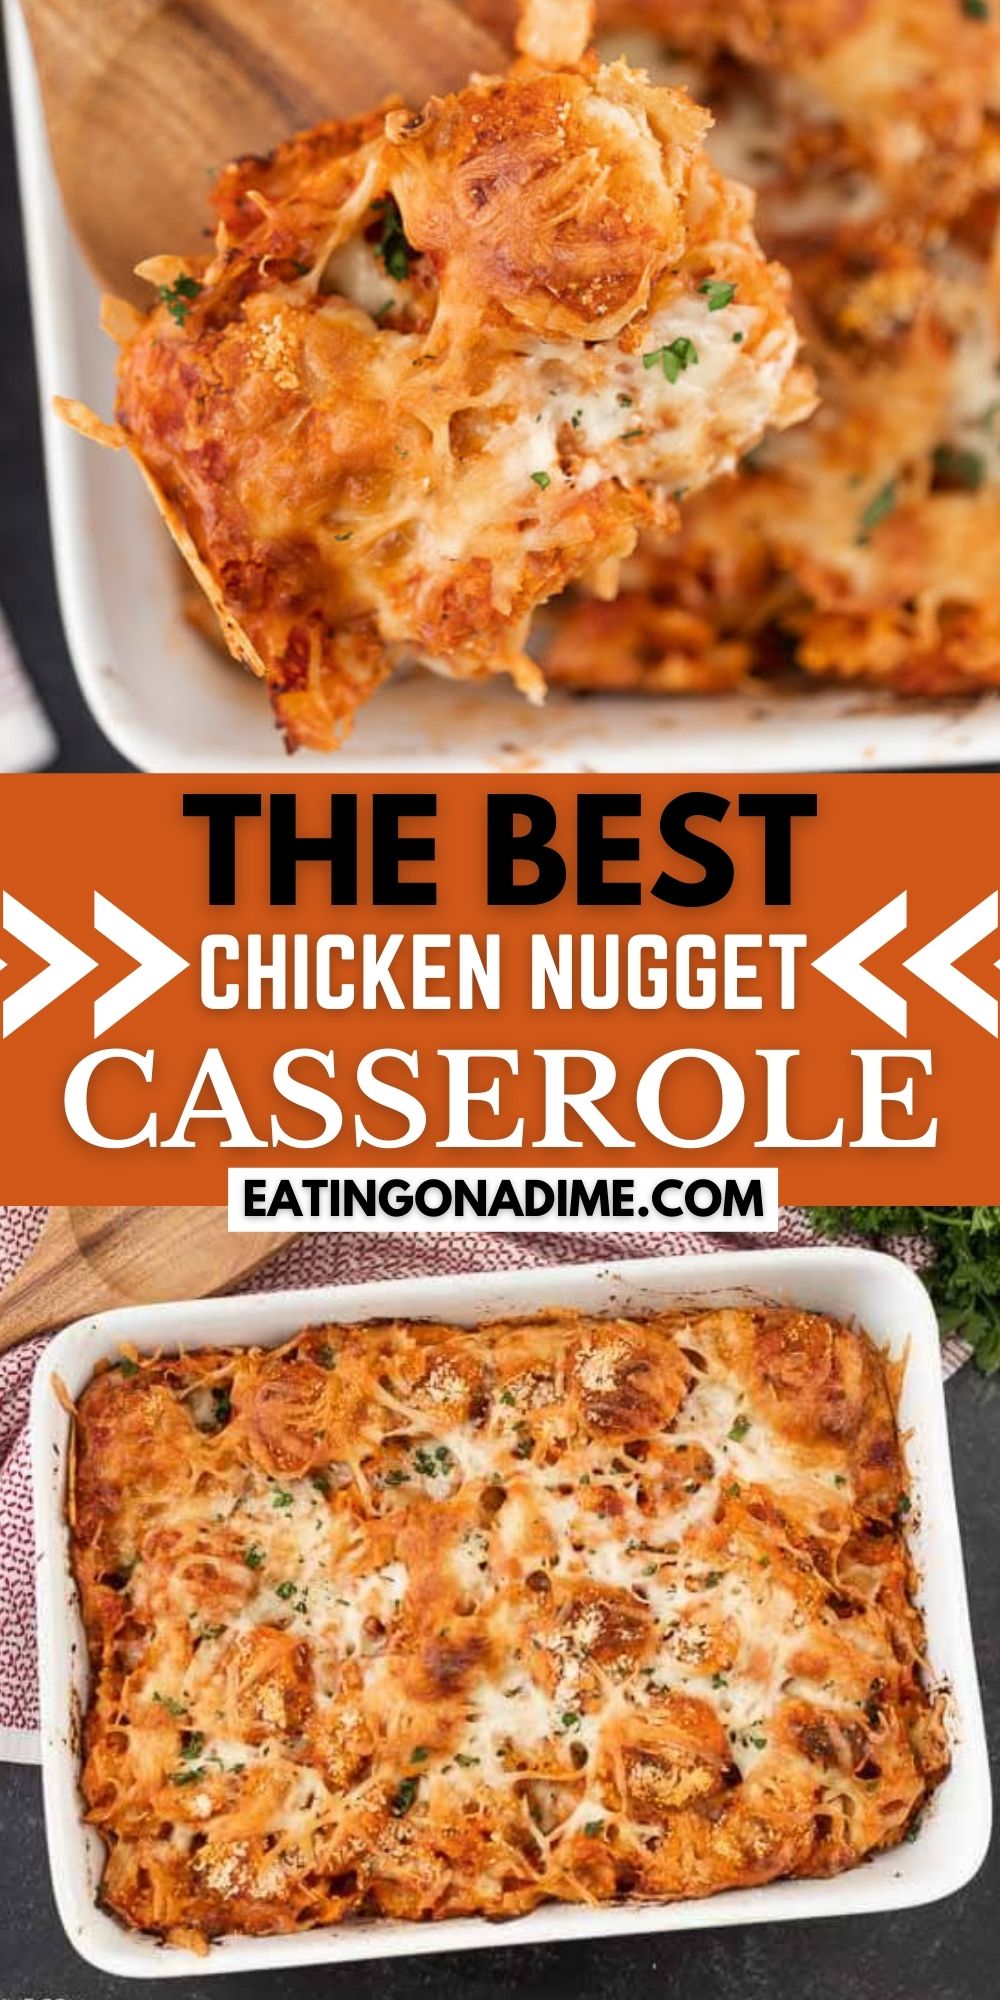 You have to try this easy chicken nugget casserole recipe. It is so fun and very easy to make. This chicken nugget casserole is perfect for your next family movie night. This is one of my favorite chicken nugget recipes.  It tastes just like a lazy day chicken parmesan casserole! #eatingonadime #chickenrecipes #chickennuggetrecipes #casserolerecipes 